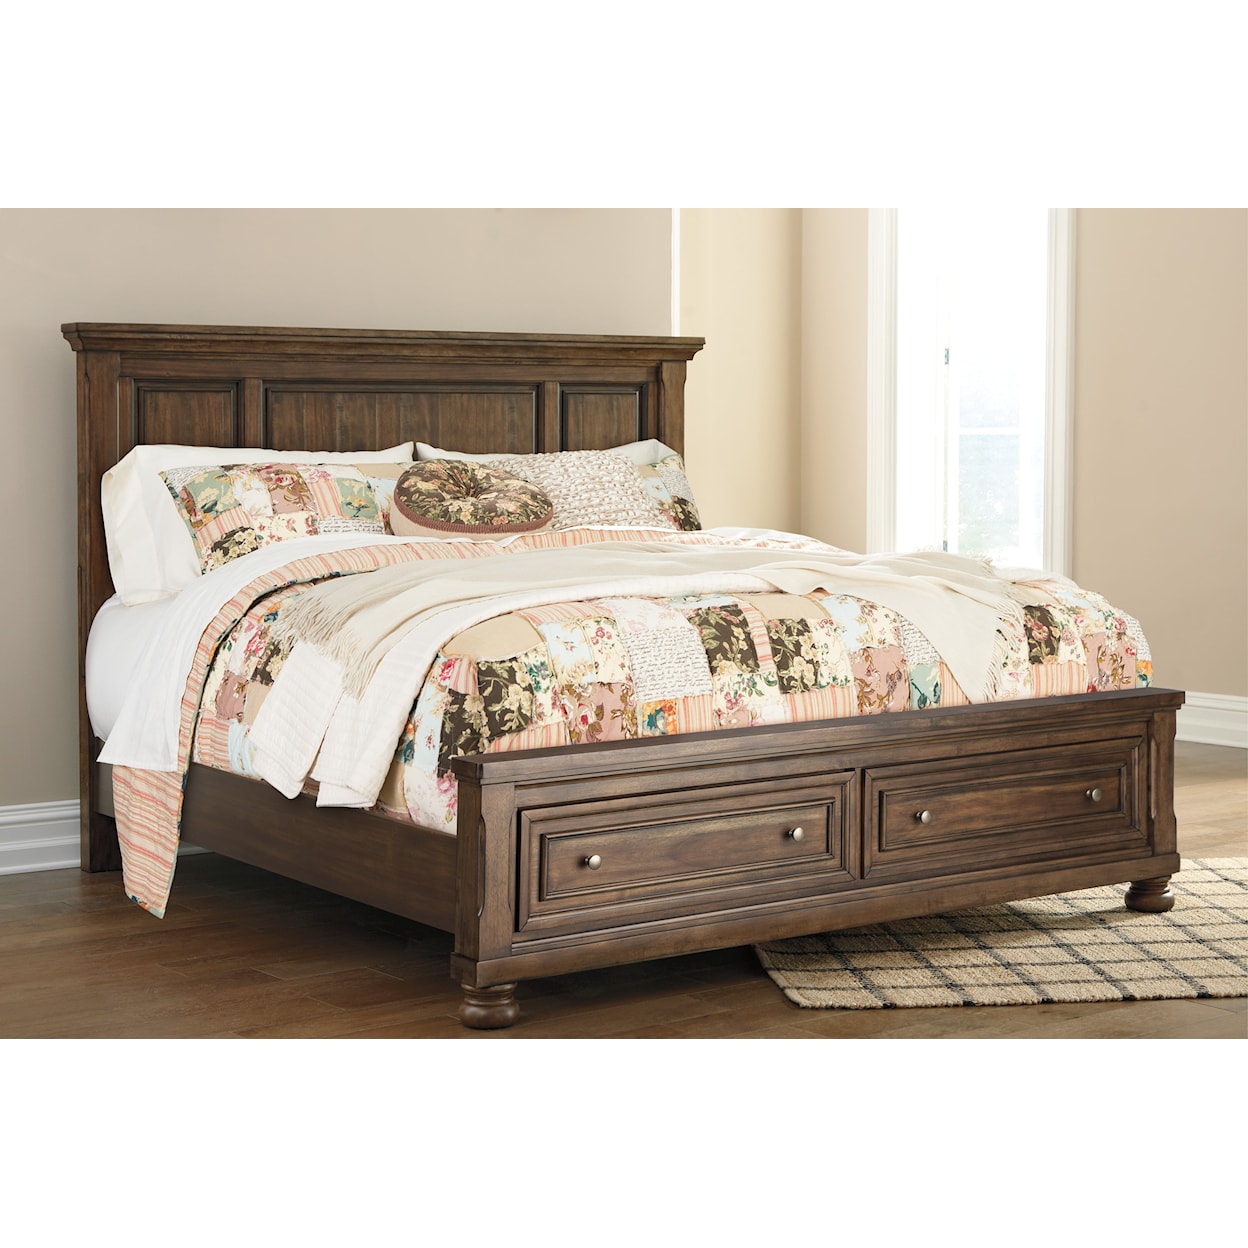 Ashley Furniture Signature Design Flynnter King Panel Bed with Storage